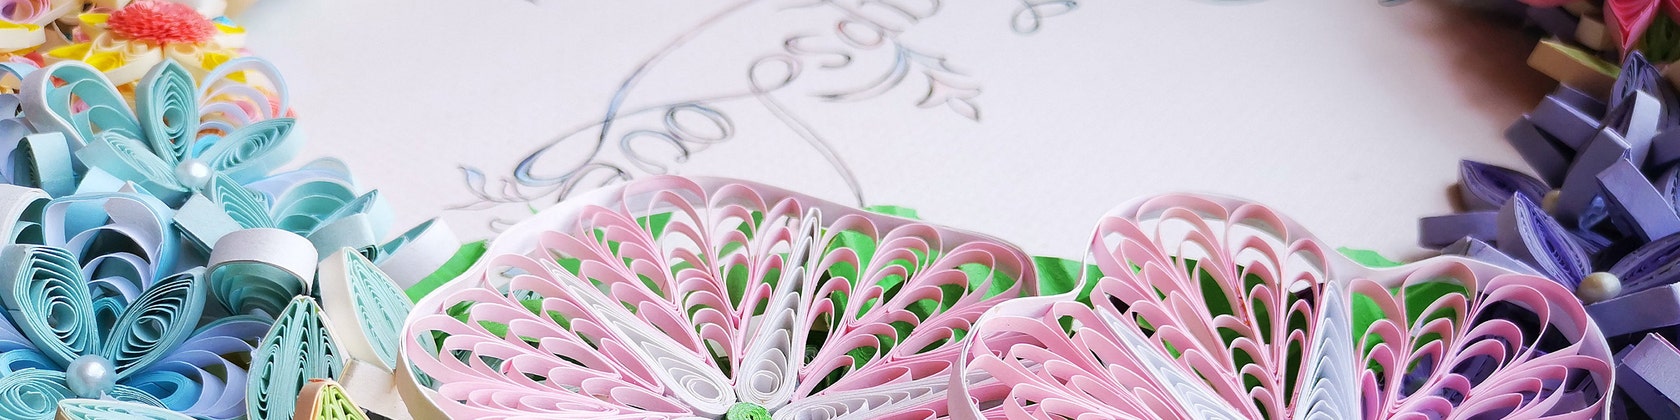 Christmas 9 Colors 900 Strips Quilling Paper Kit,quilling Paper Set Art  Strips For Diy Craft Christmas Gifts.5 Mm Width And 39 Cm Length.